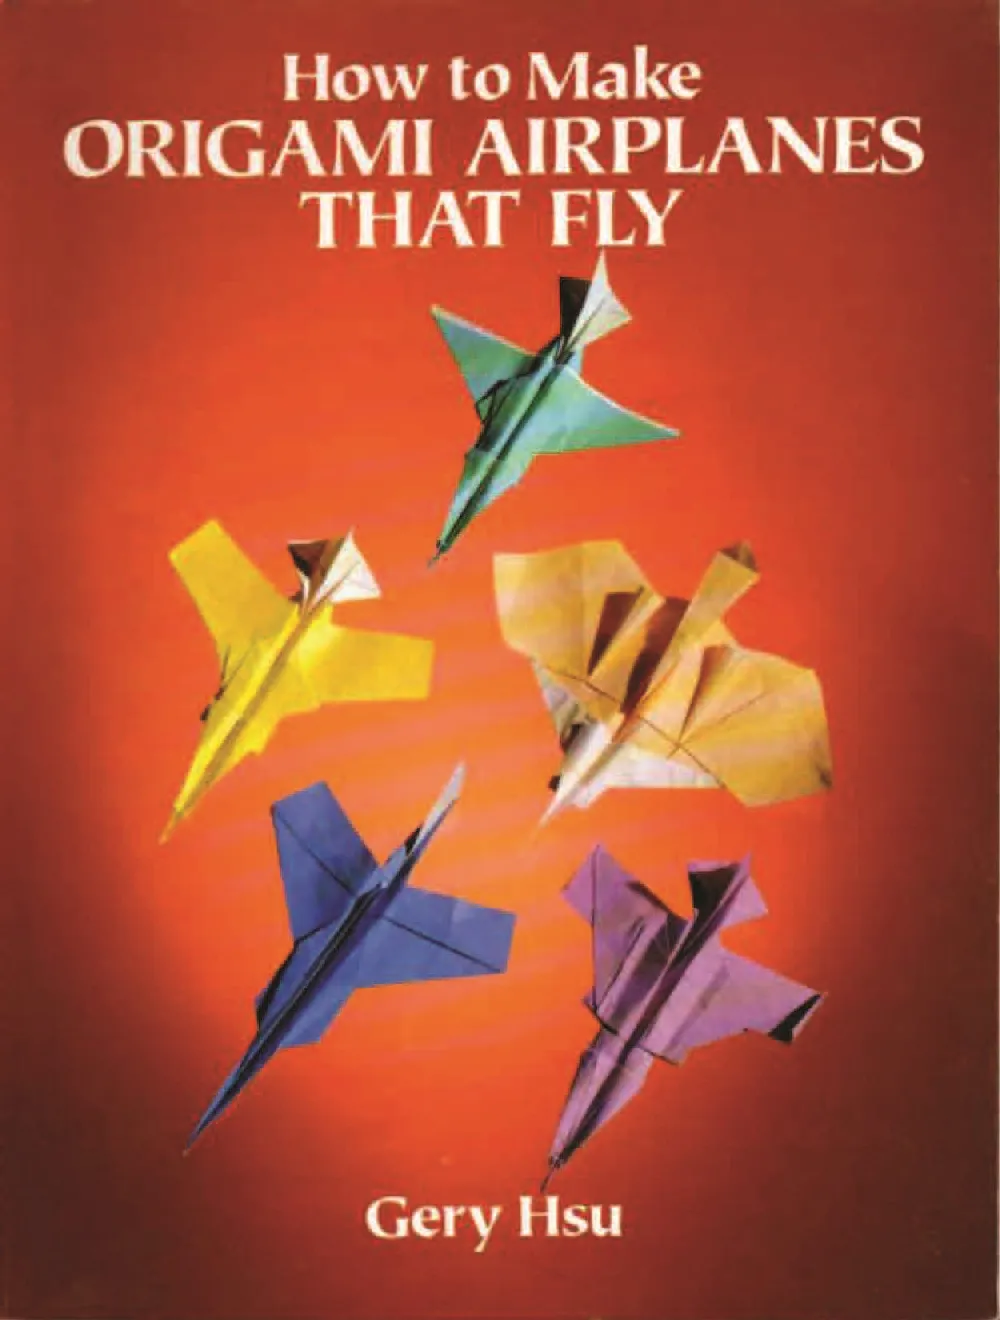 Origami Airplanes that Fly